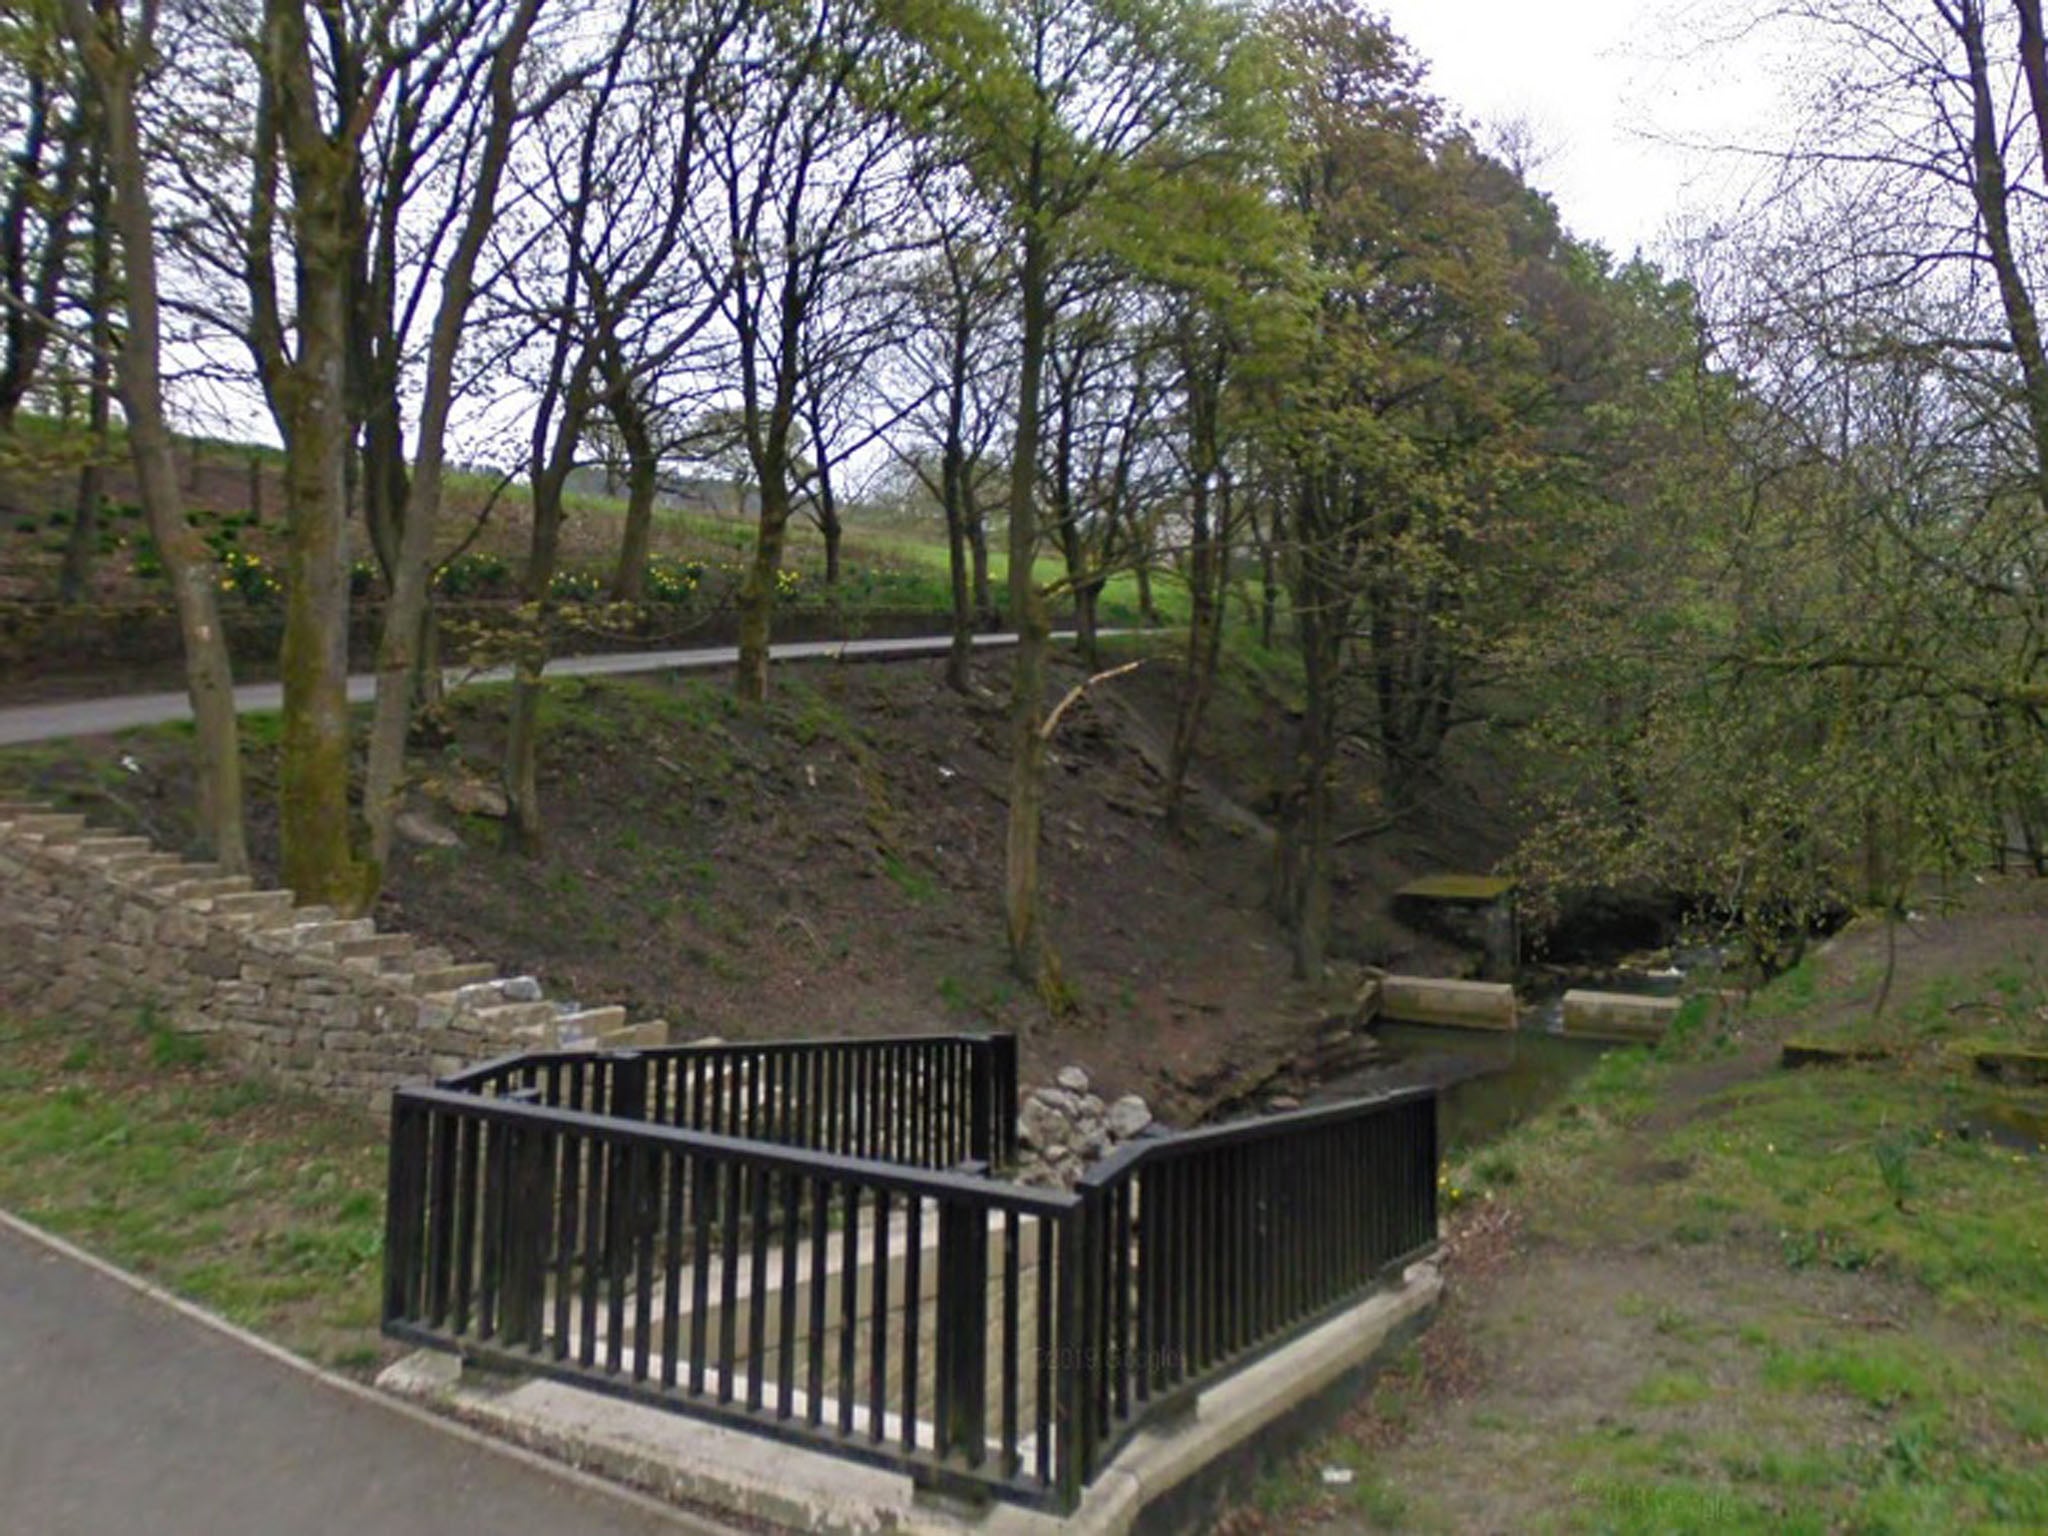 Firefighters rescued the 12-month-old from the River Irwell, but he later died in hospital.